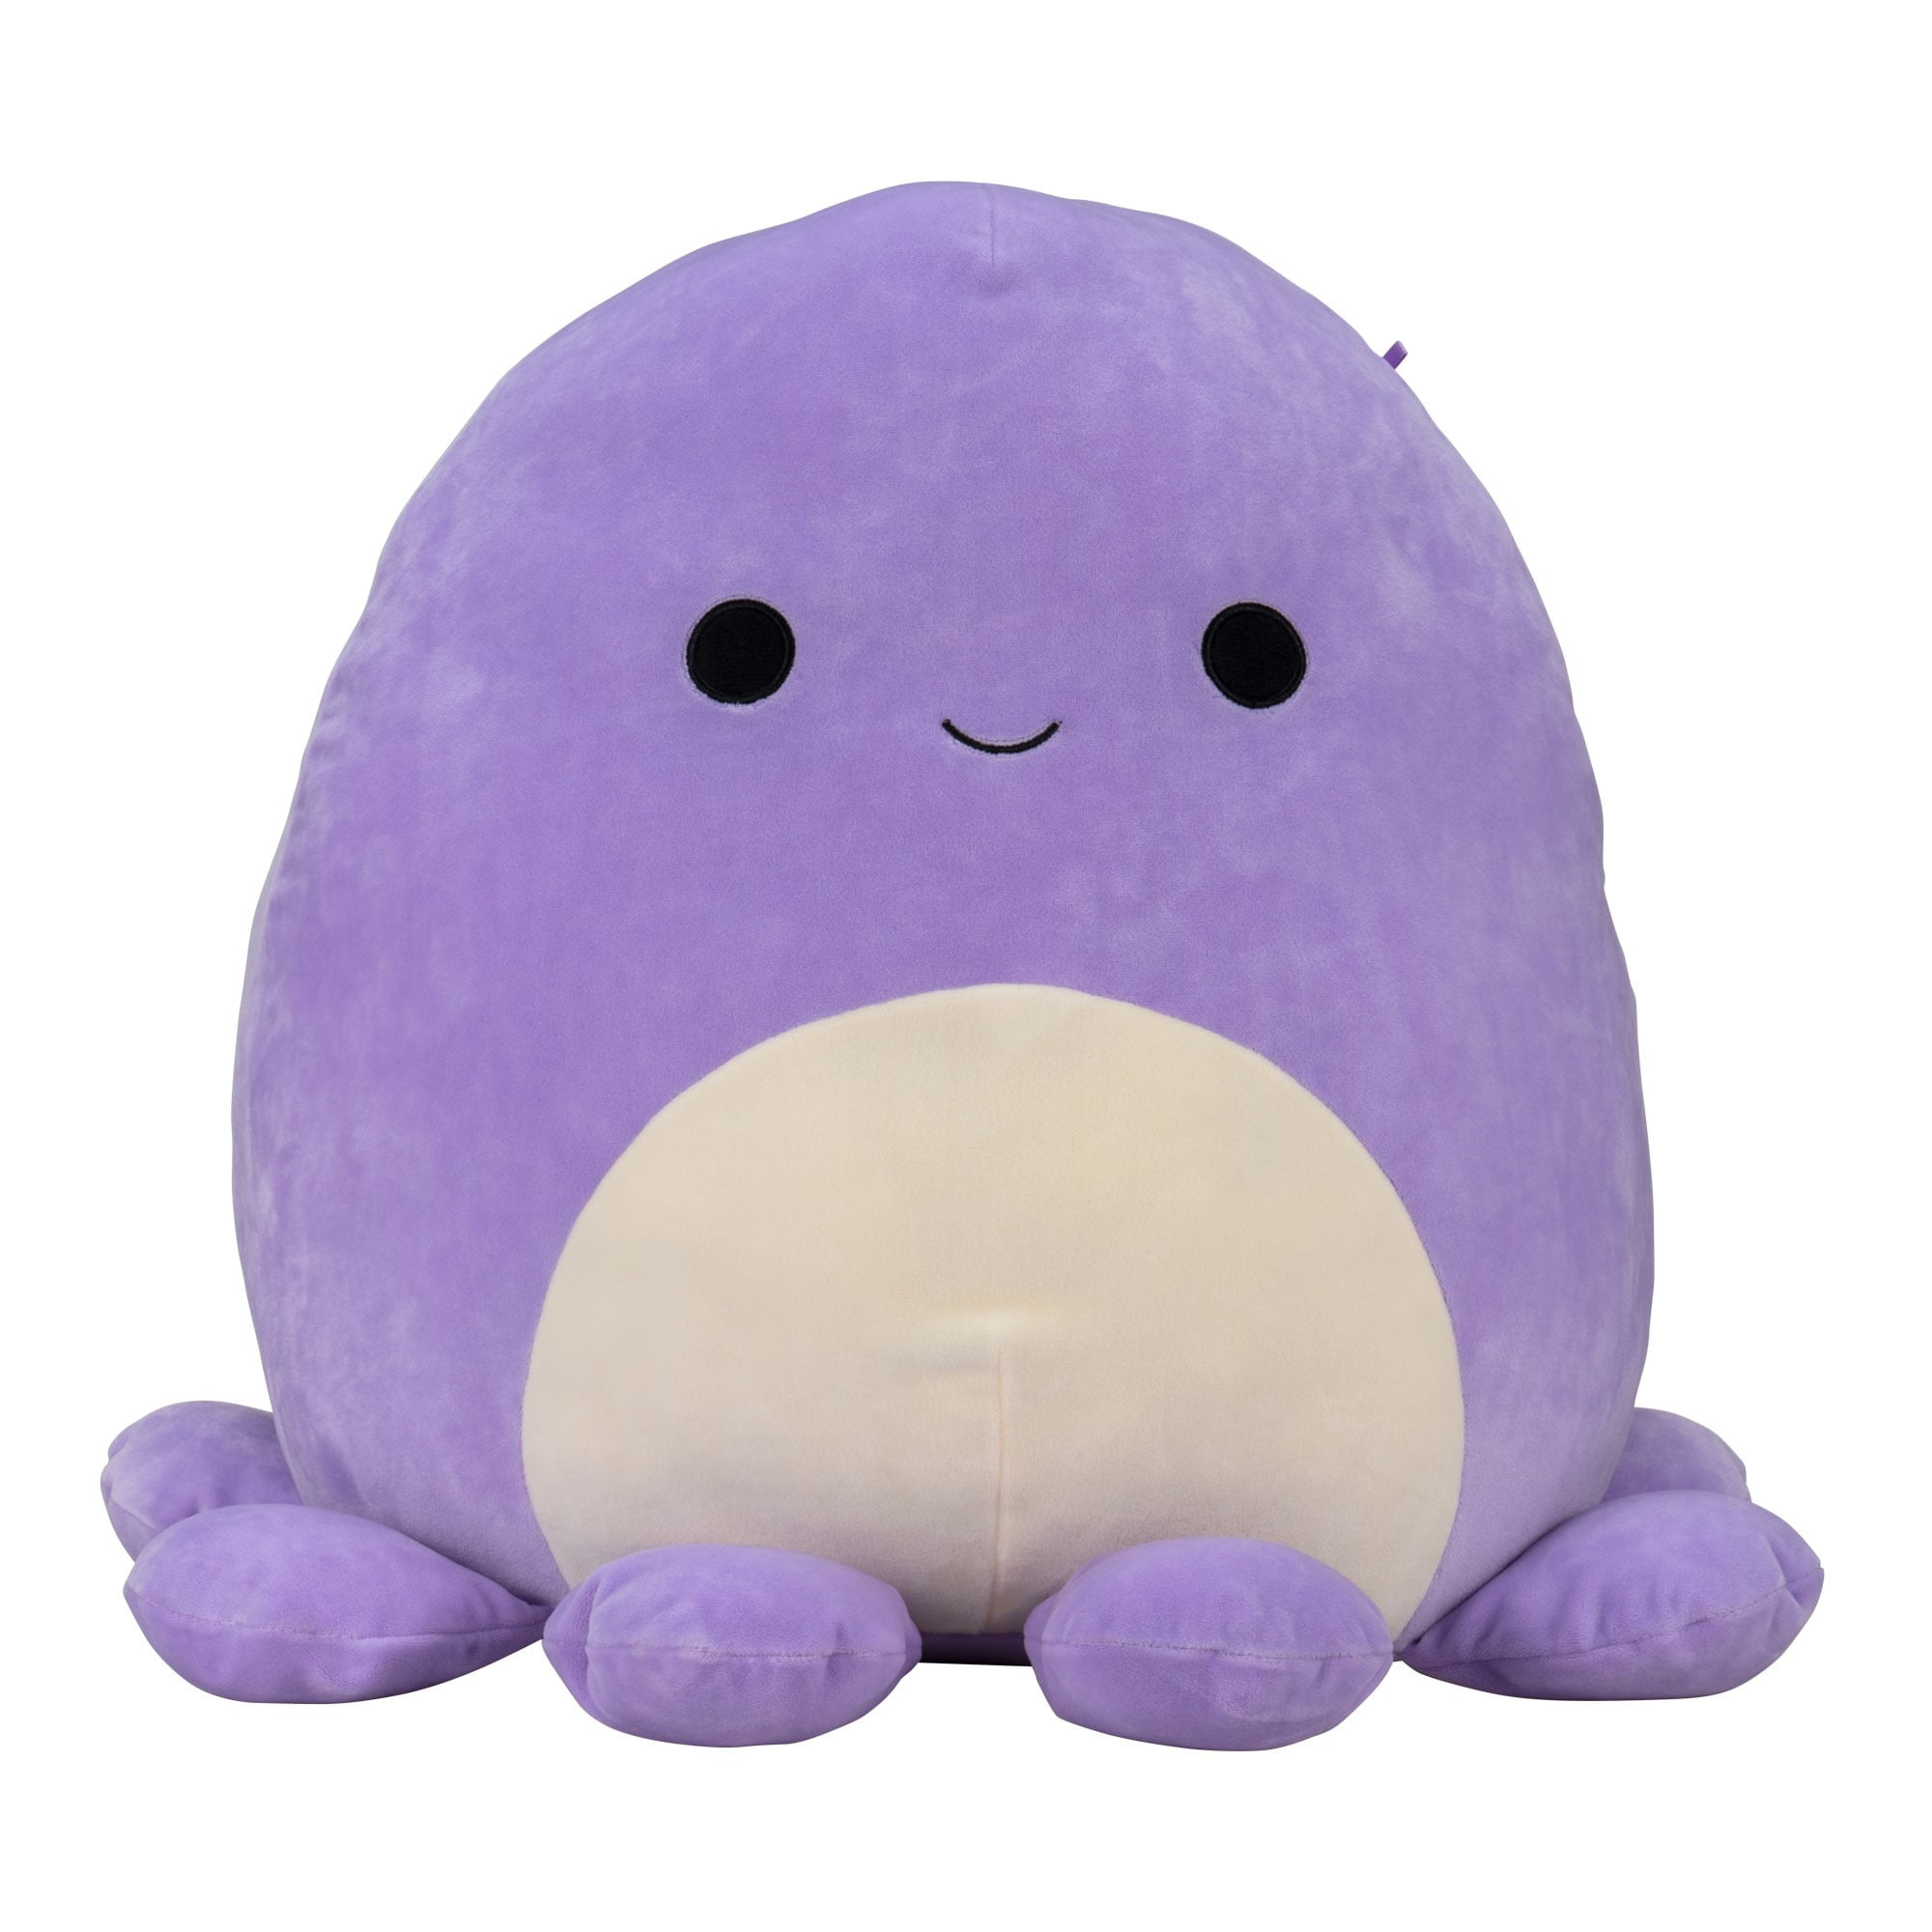 Squishmallows Official Kellytoy 12 Inch Soft Plush Squishy Toy Animals Adelaide Tie Dye Octopus 